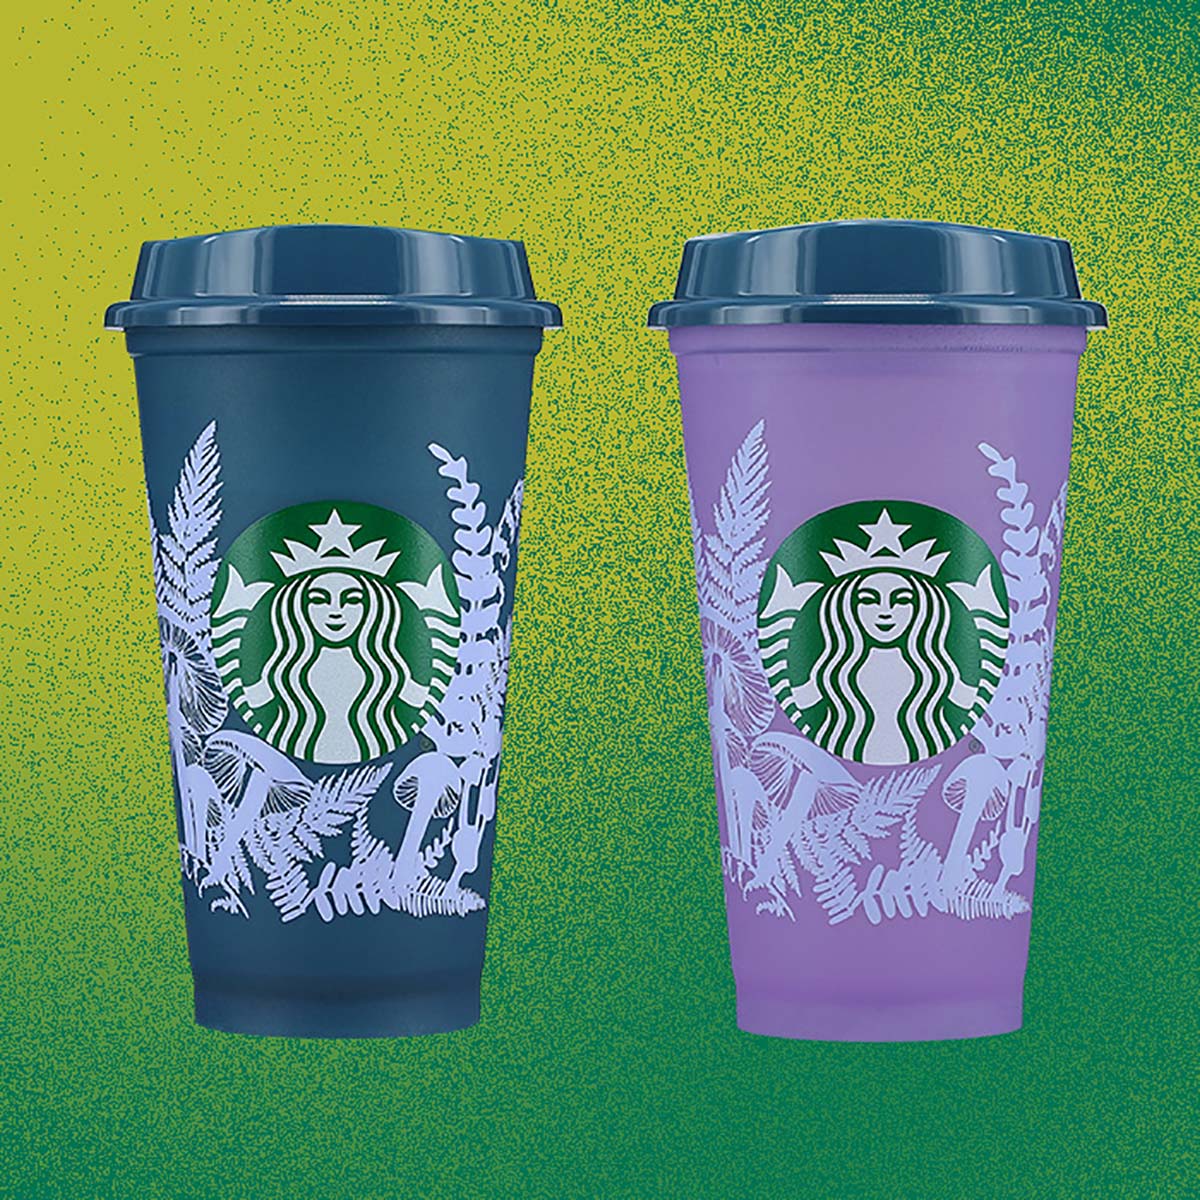 Starbucks Color Changing Hot Cup.